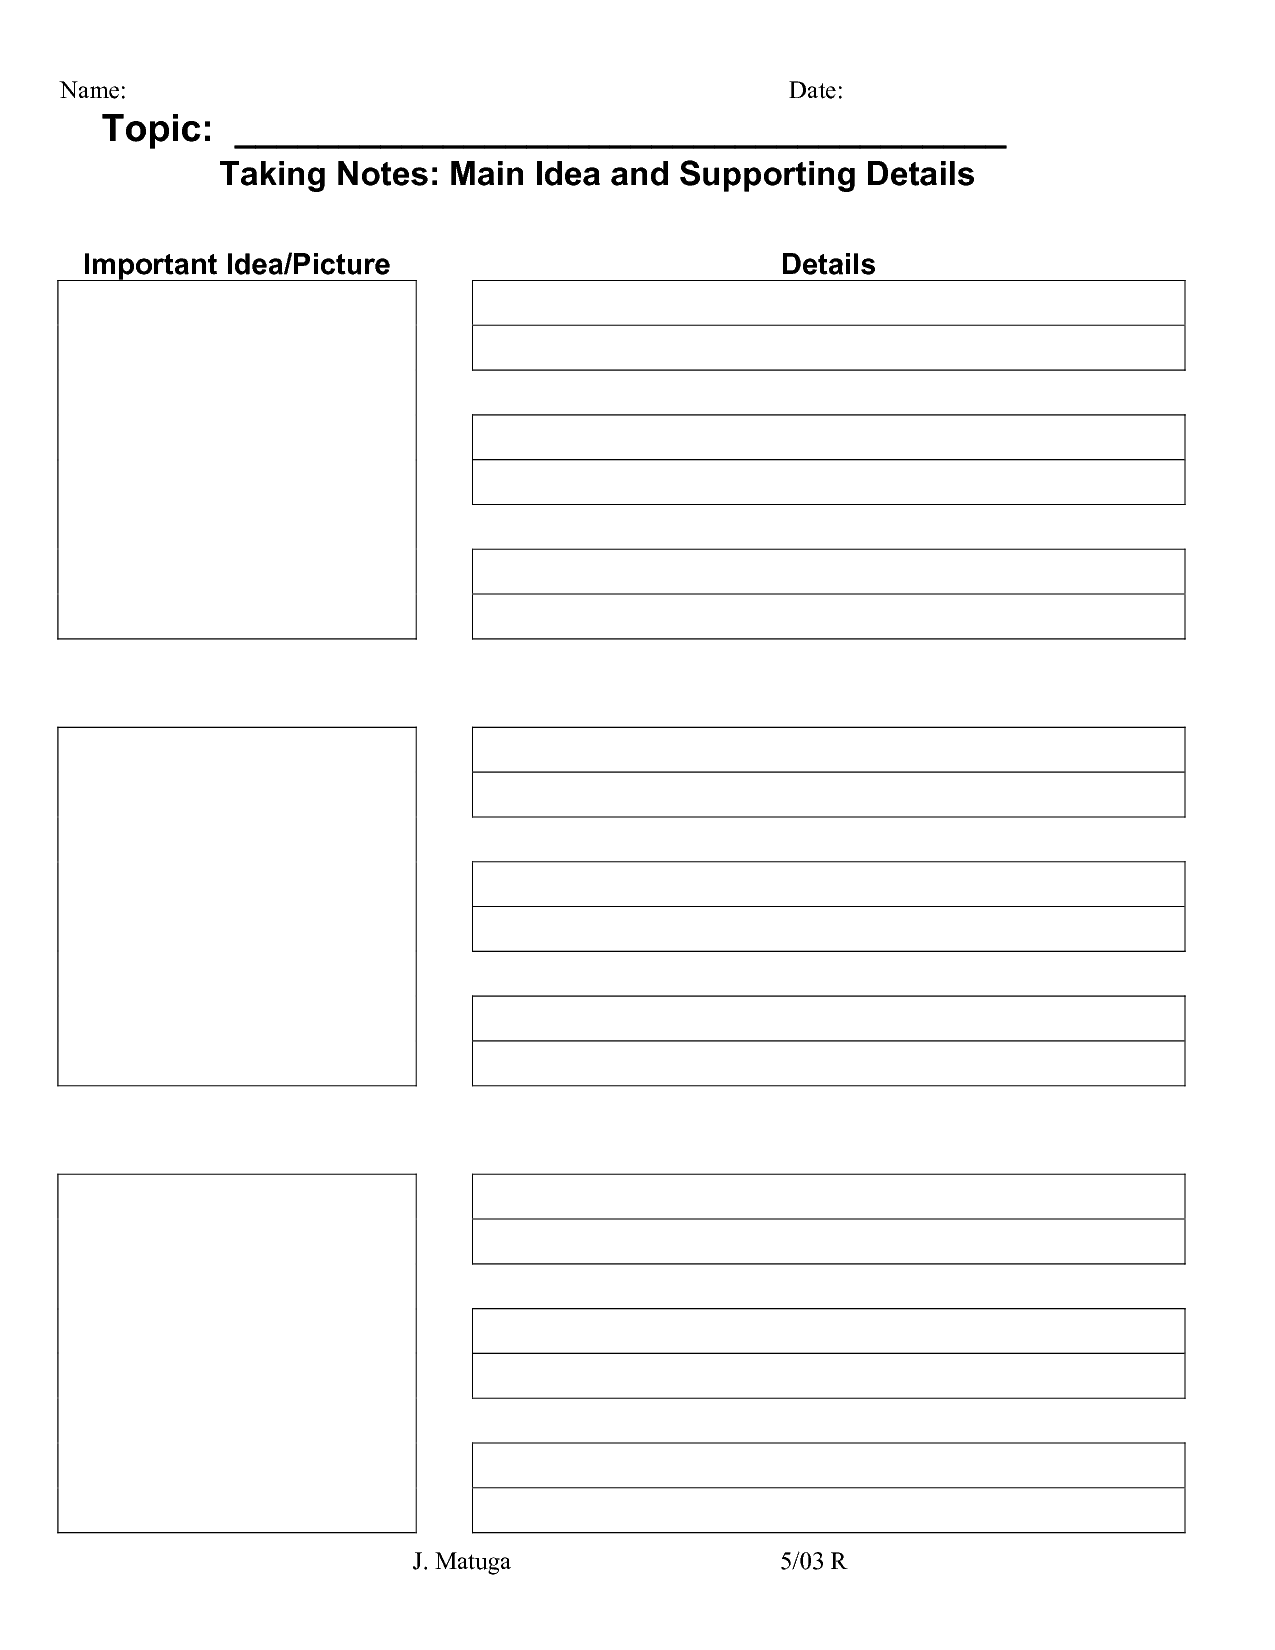 13 Best Images Of Idea Supporting And Main Worksheets Details Practice 